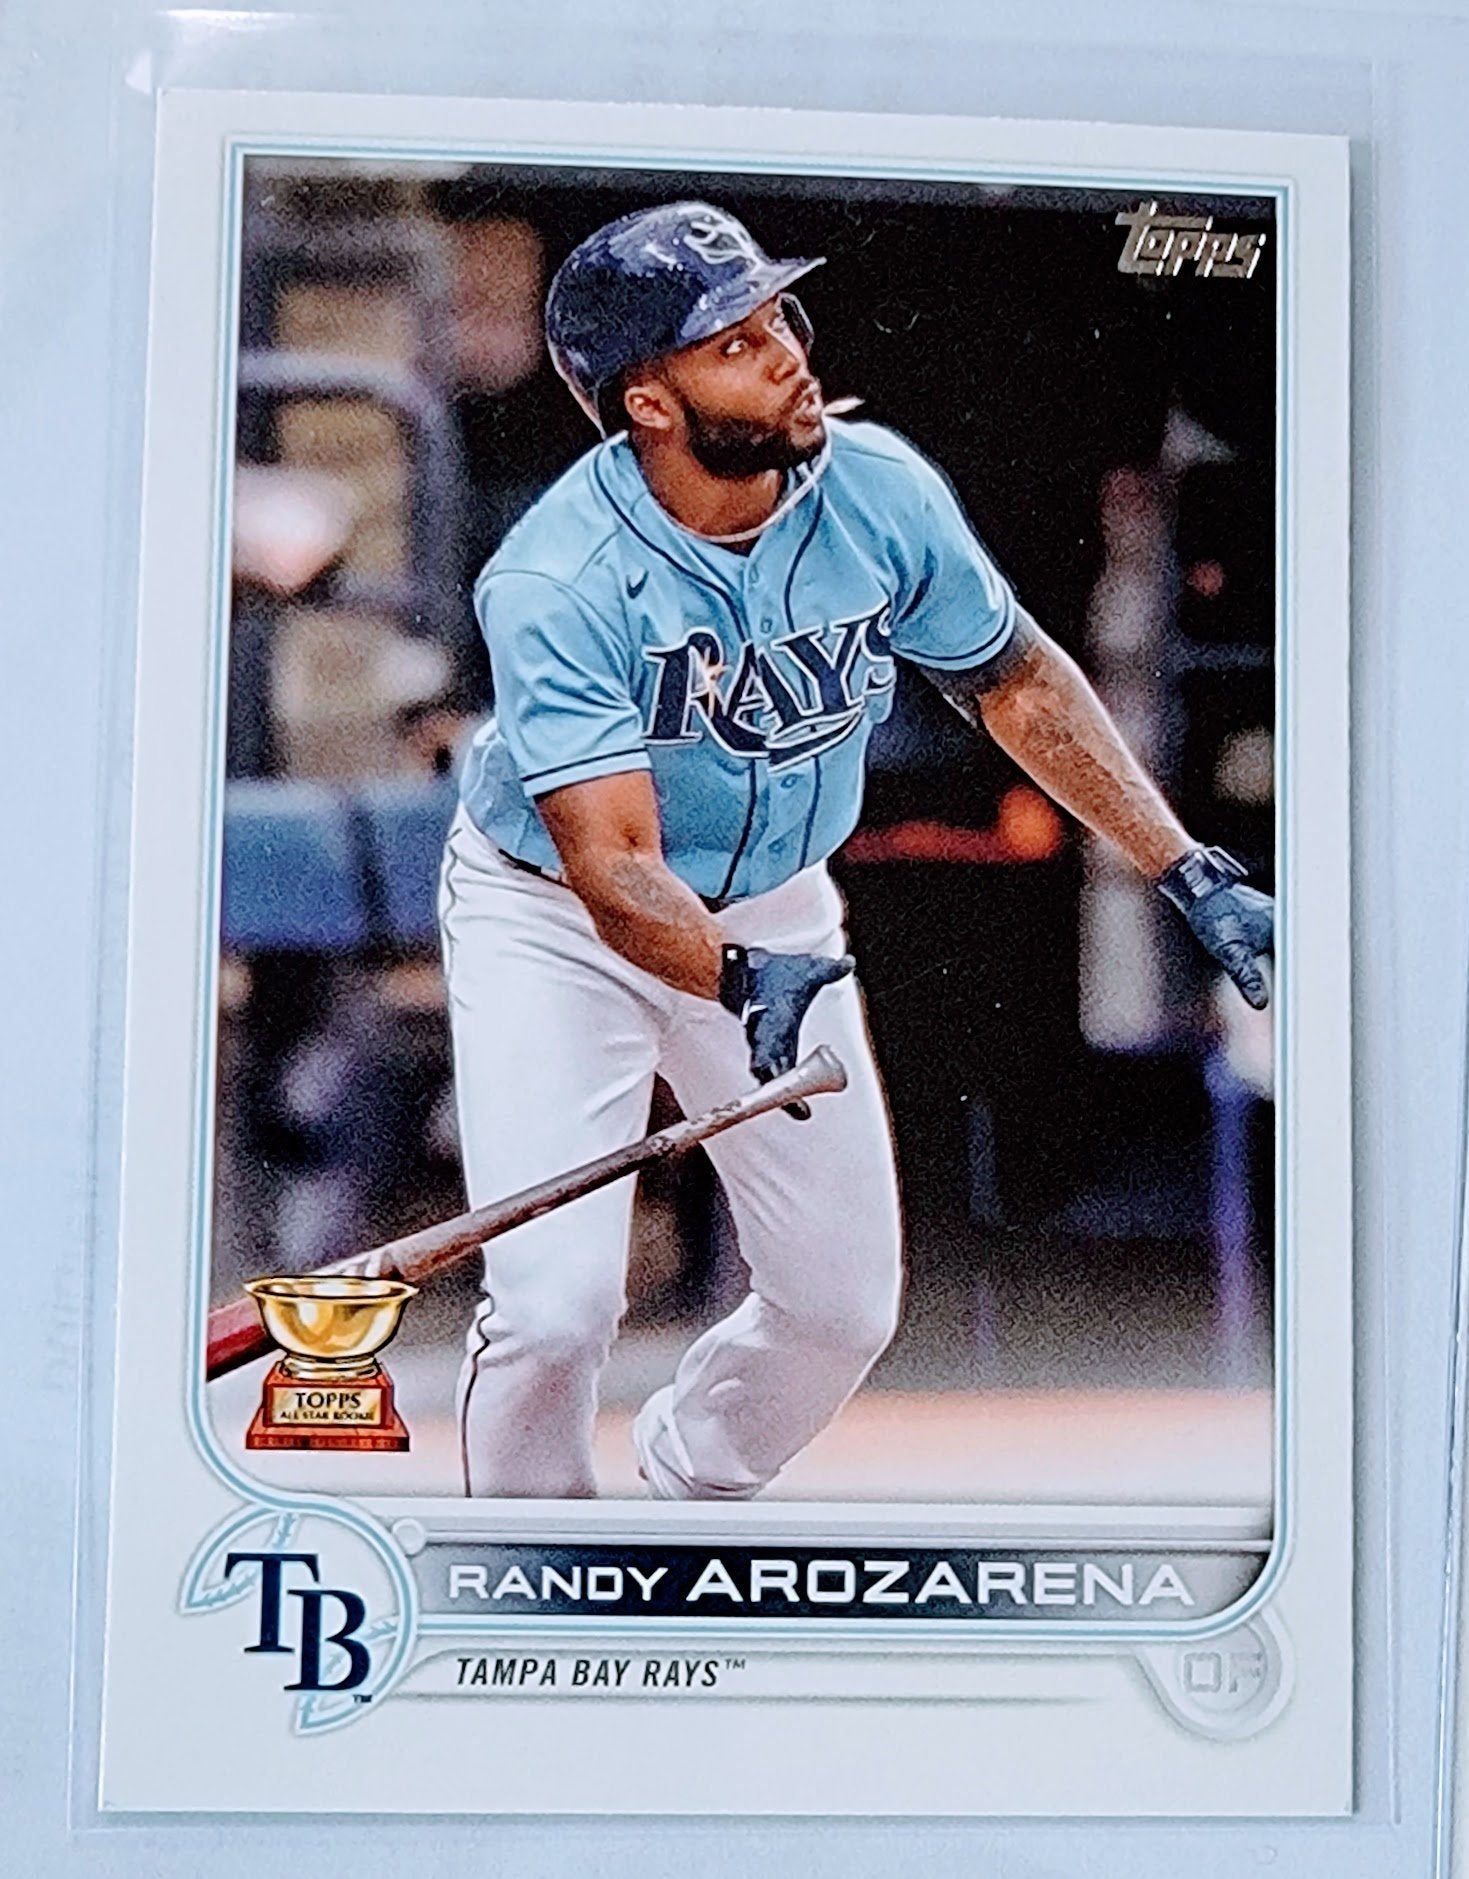 2022 Topps Randy Arozerena All Star Rookie Cup Baseball Trading Card GRB1 simple Xclusive Collectibles   